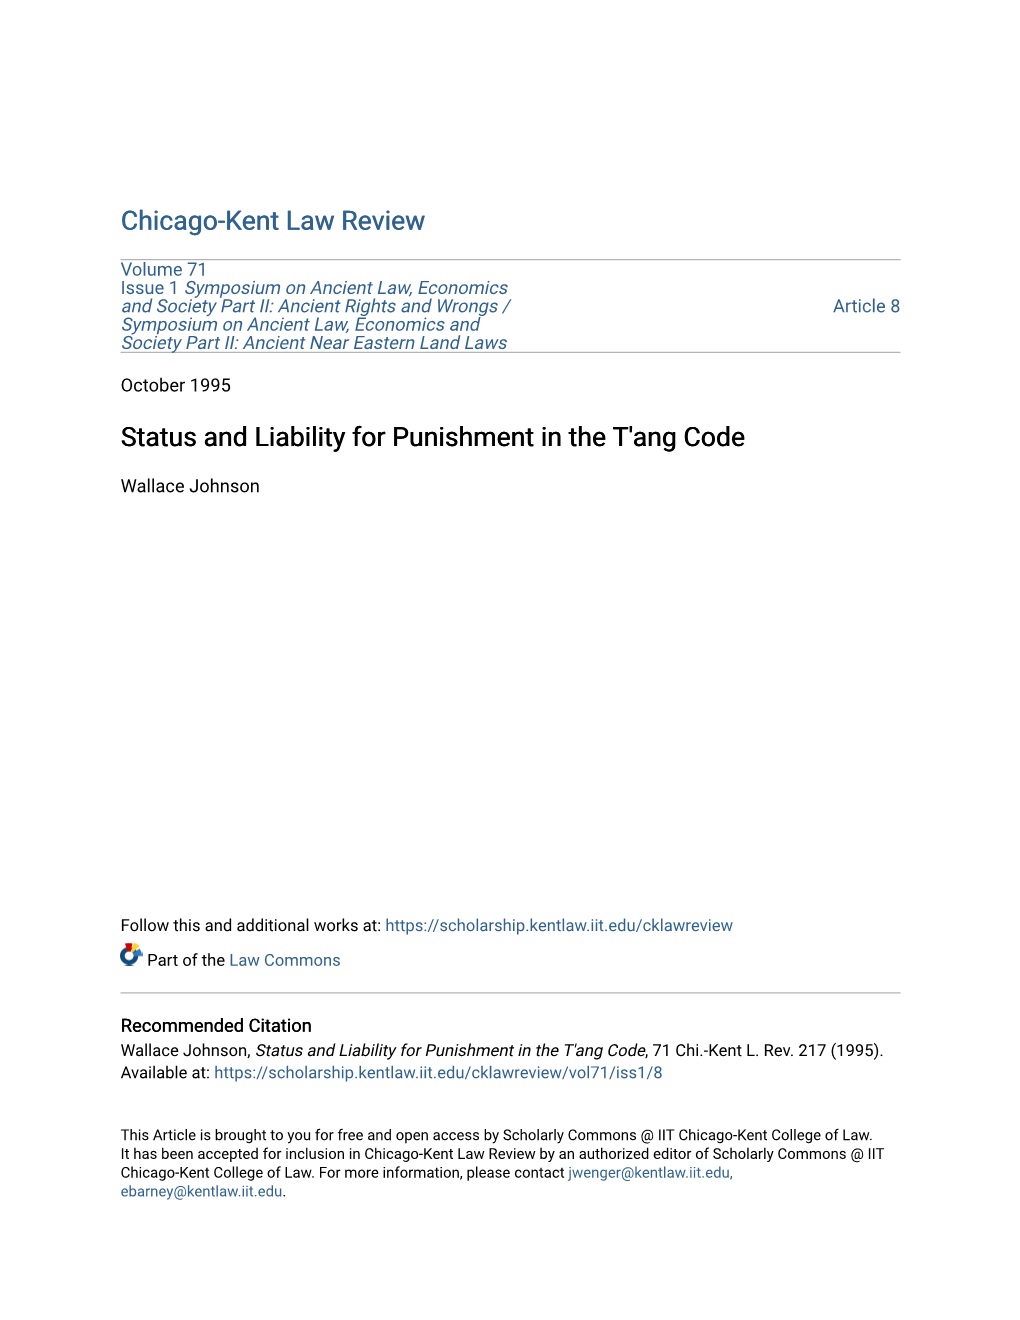 Status and Liability for Punishment in the T'ang Code